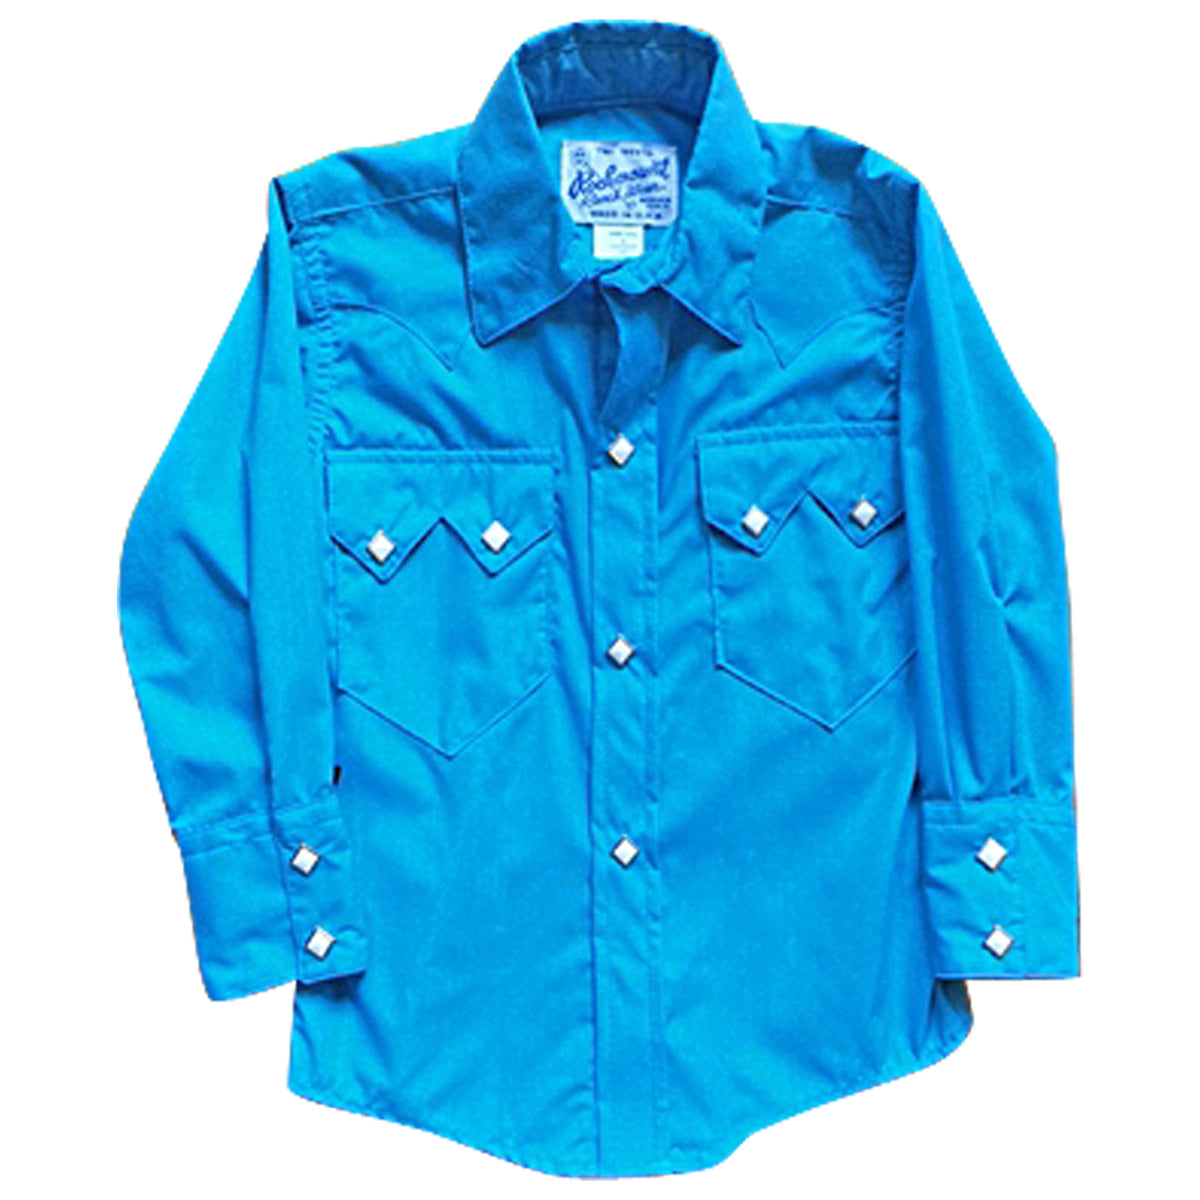 Kid's Vintage Solid Turquoise Western Shirt - Rockmount